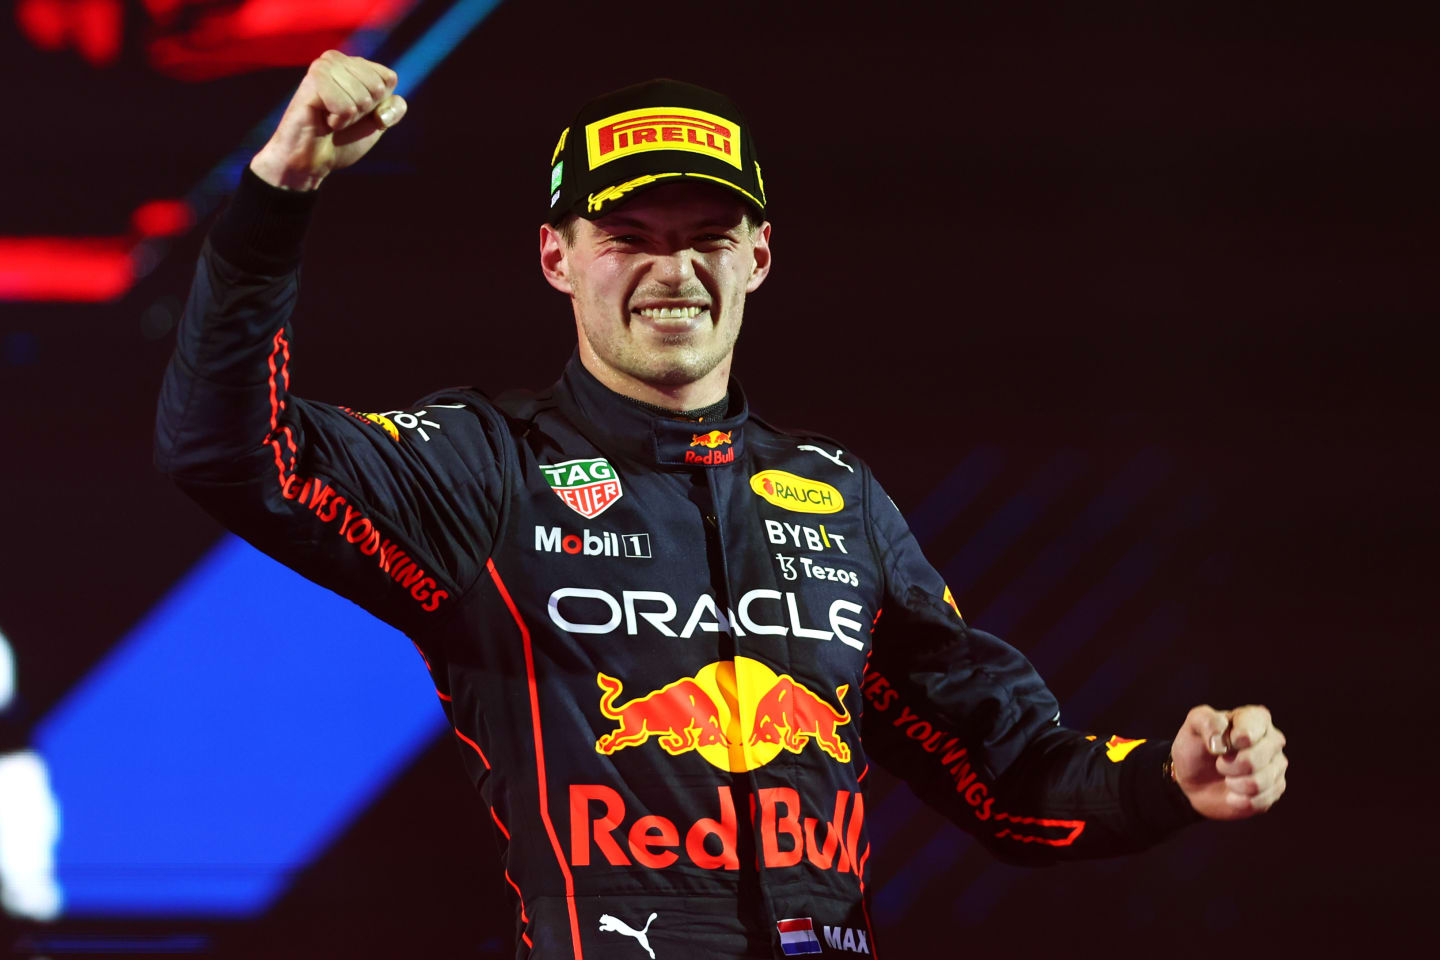 JEDDAH, SAUDI ARABIA - MARCH 27: Race winner Max Verstappen of the Netherlands and Oracle Red Bull Racing celebrates on the podium during the F1 Grand Prix of Saudi Arabia at the Jeddah Corniche Circuit on March 27, 2022 in Jeddah, Saudi Arabia. (Photo by Lars Baron/Getty Images)